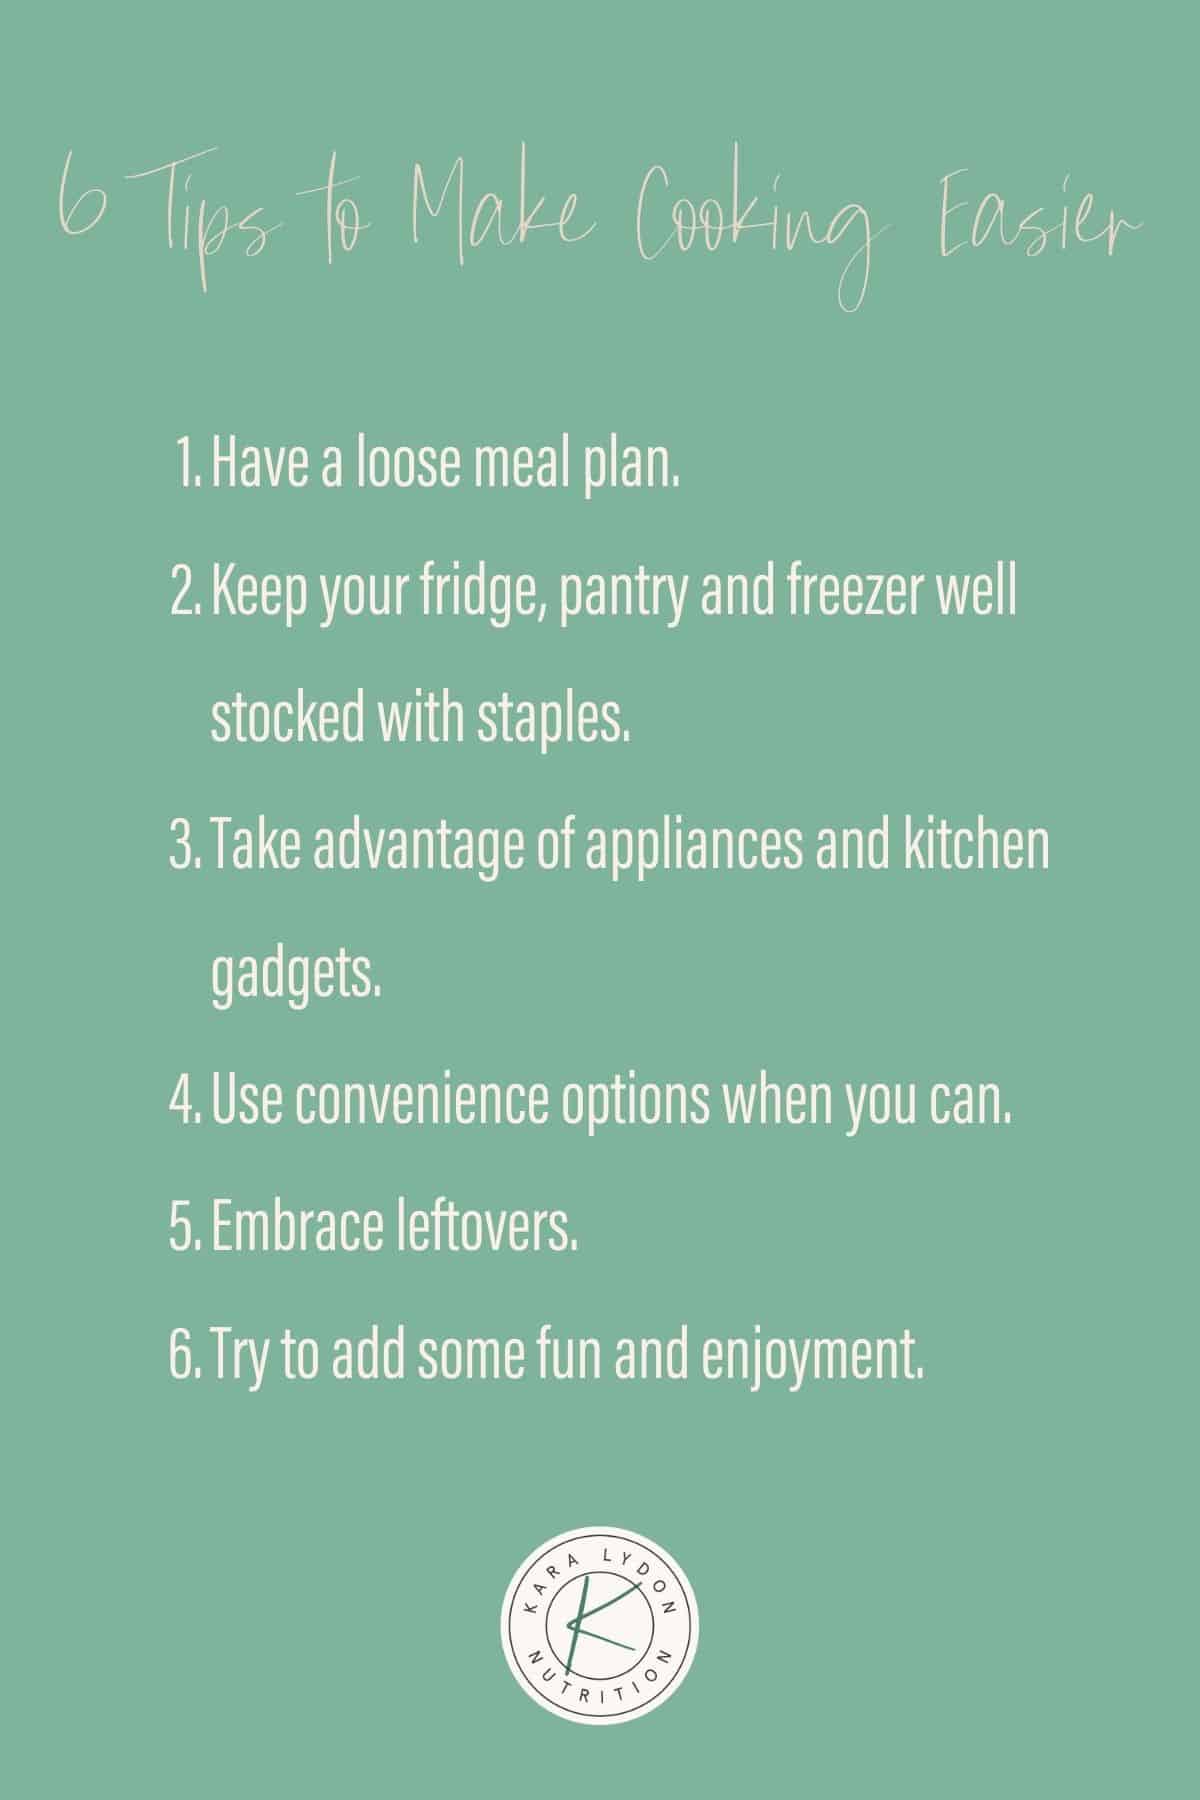 green graphic with list 1-6 of tips to make cooking easier.